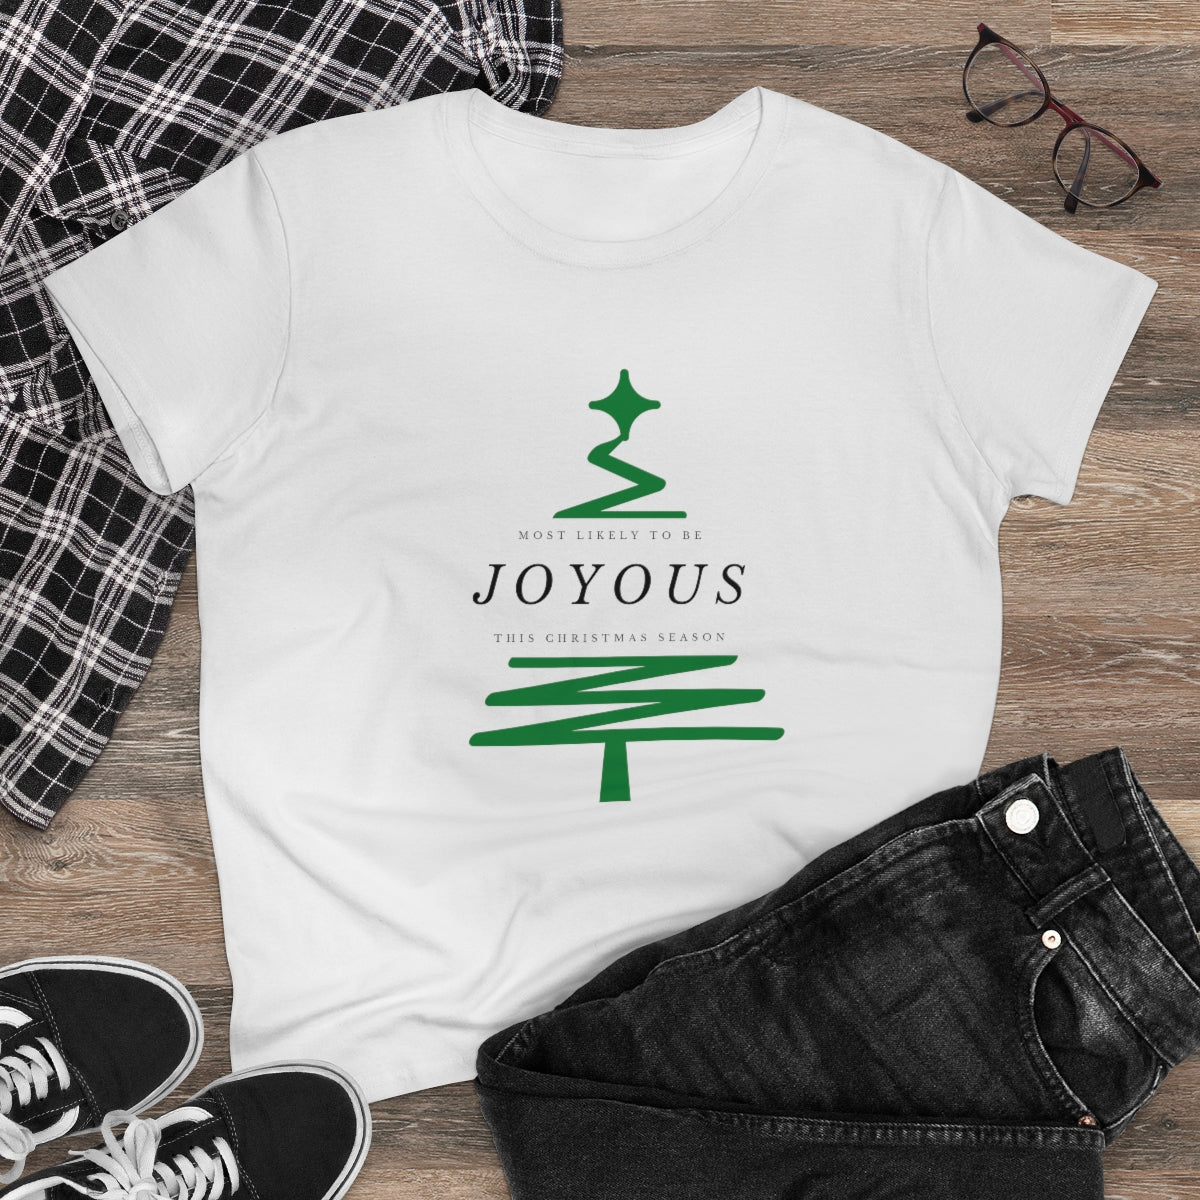 Most Likely to Be Joyous - Christmas Tee